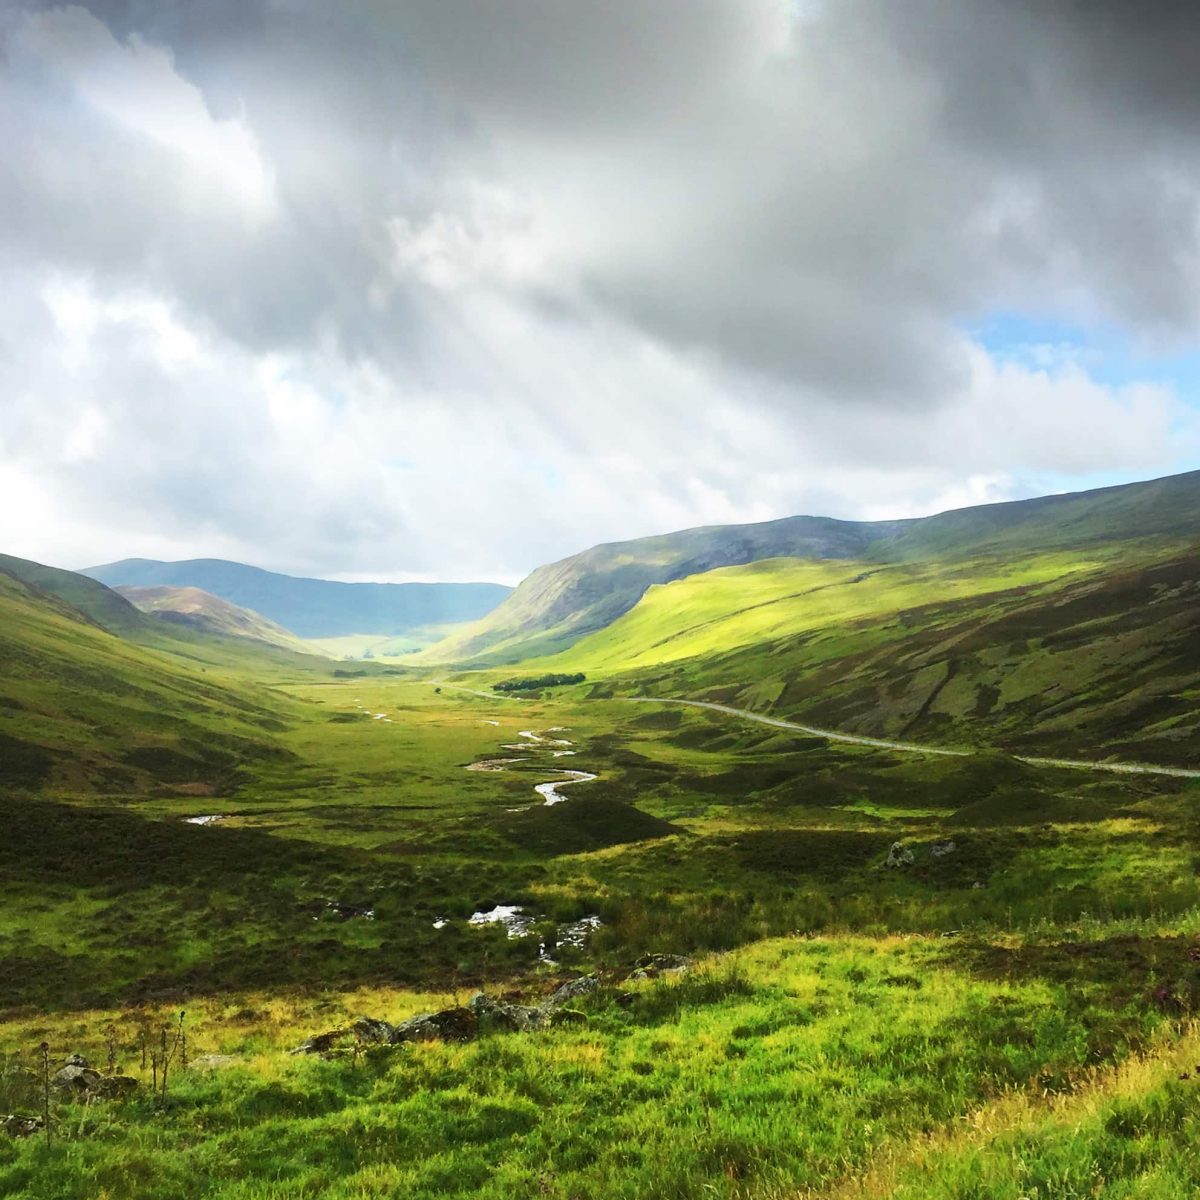 Braemar, Old Military Road, SCOTLAND, views of A939, A93 Scotland, sun breaking through clouds, best images of Scotland